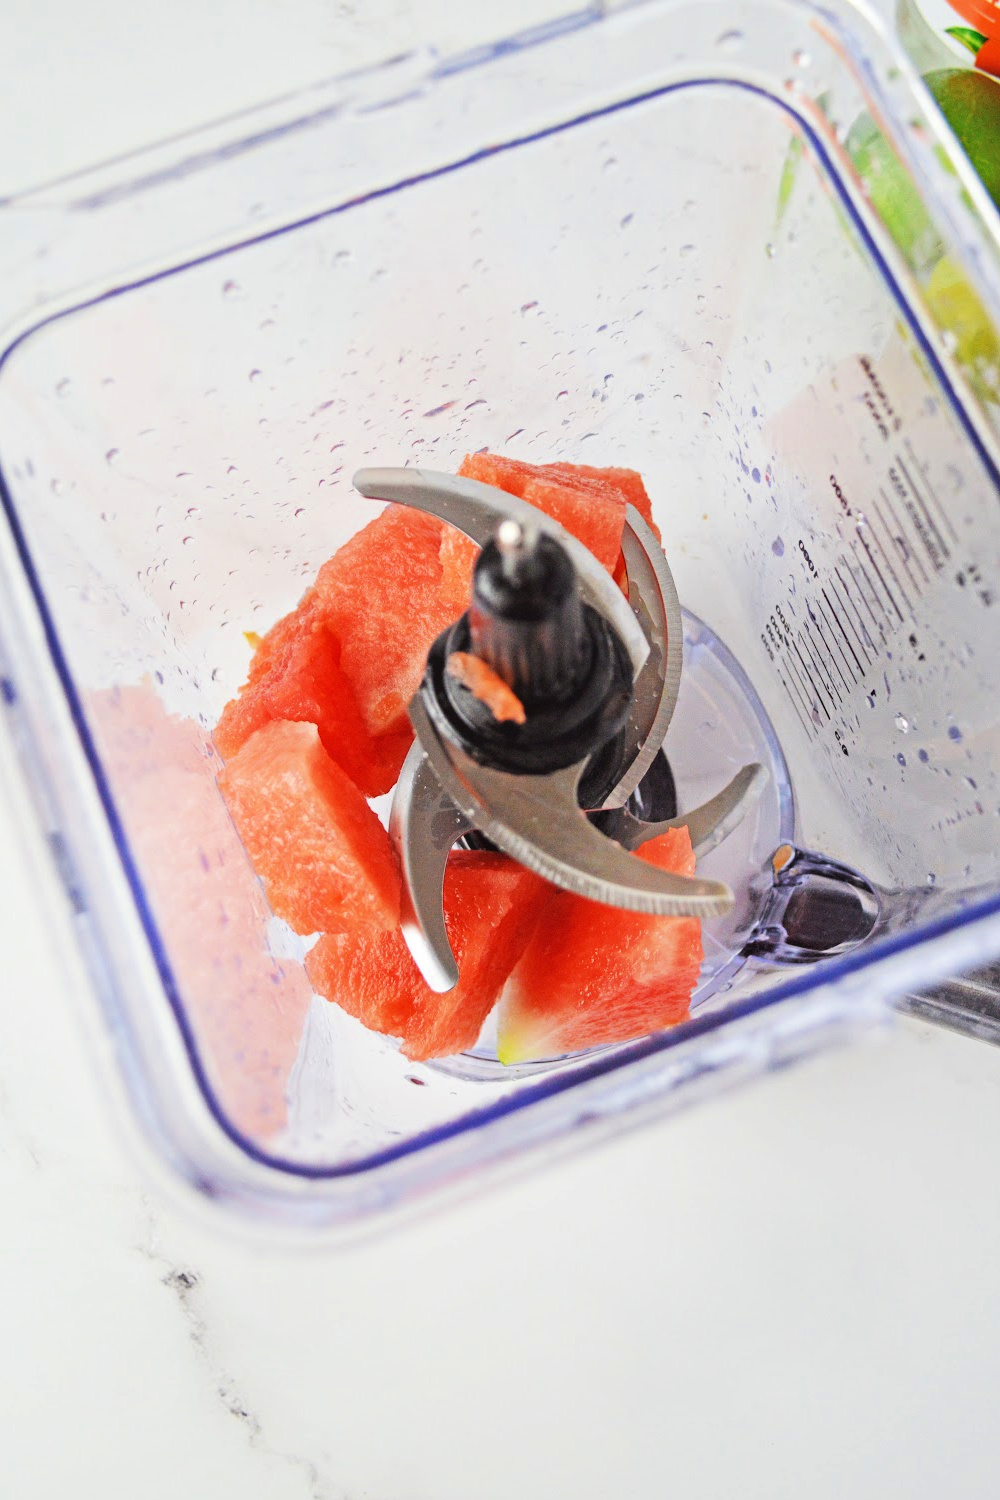 watermelon in a blender to puree.